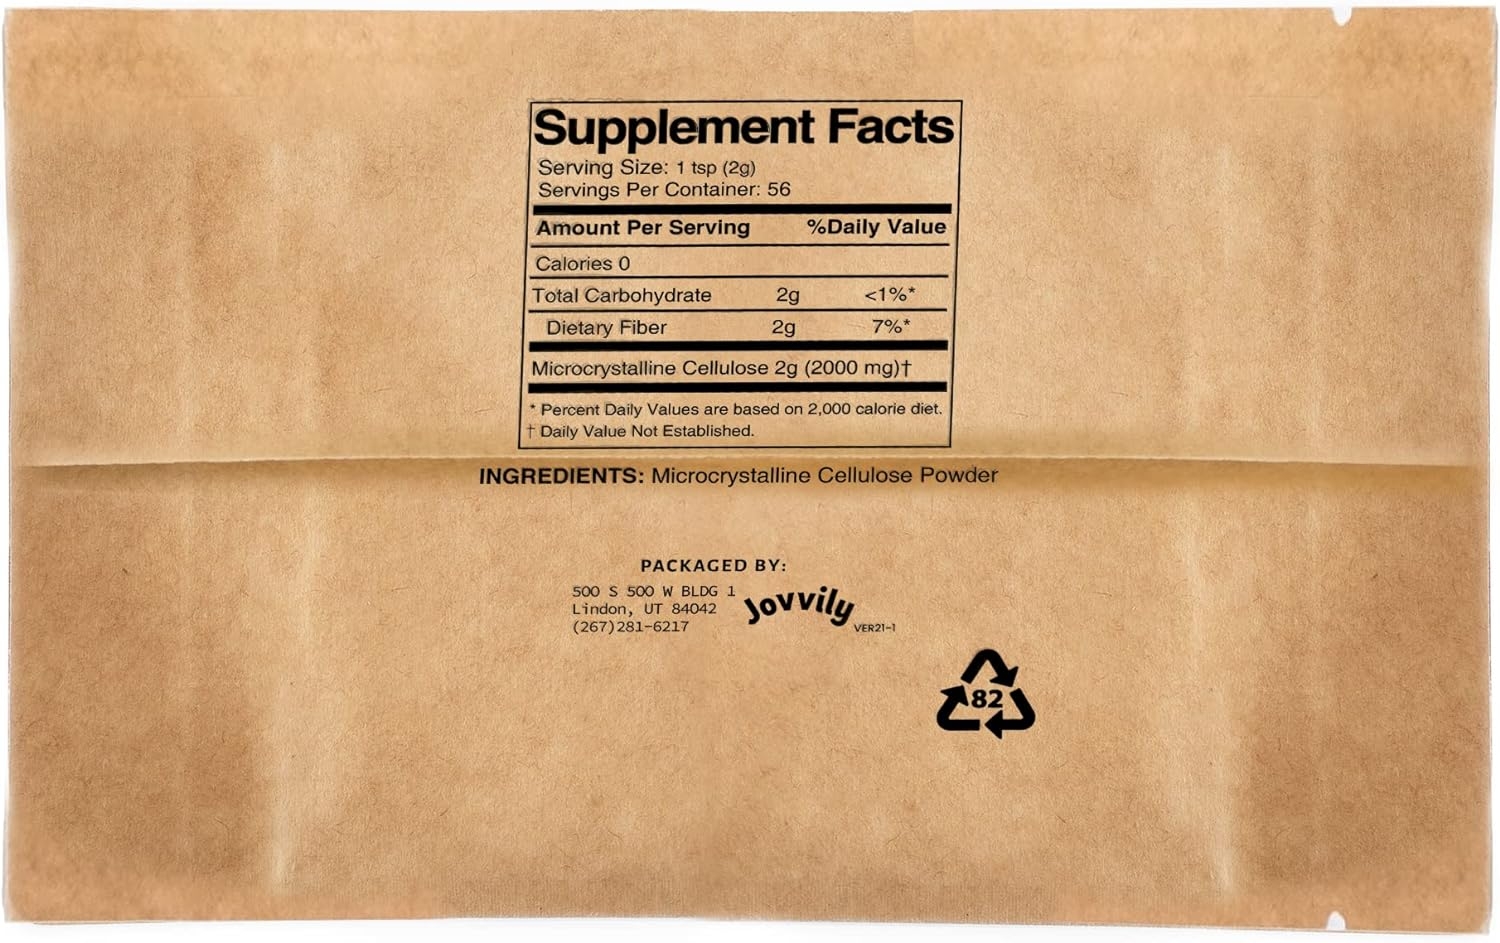 Jovvily Microcrystalline Cellulose Powder - 4 oz - Fiber Supplement - Binding Agent - Highly Absorbent